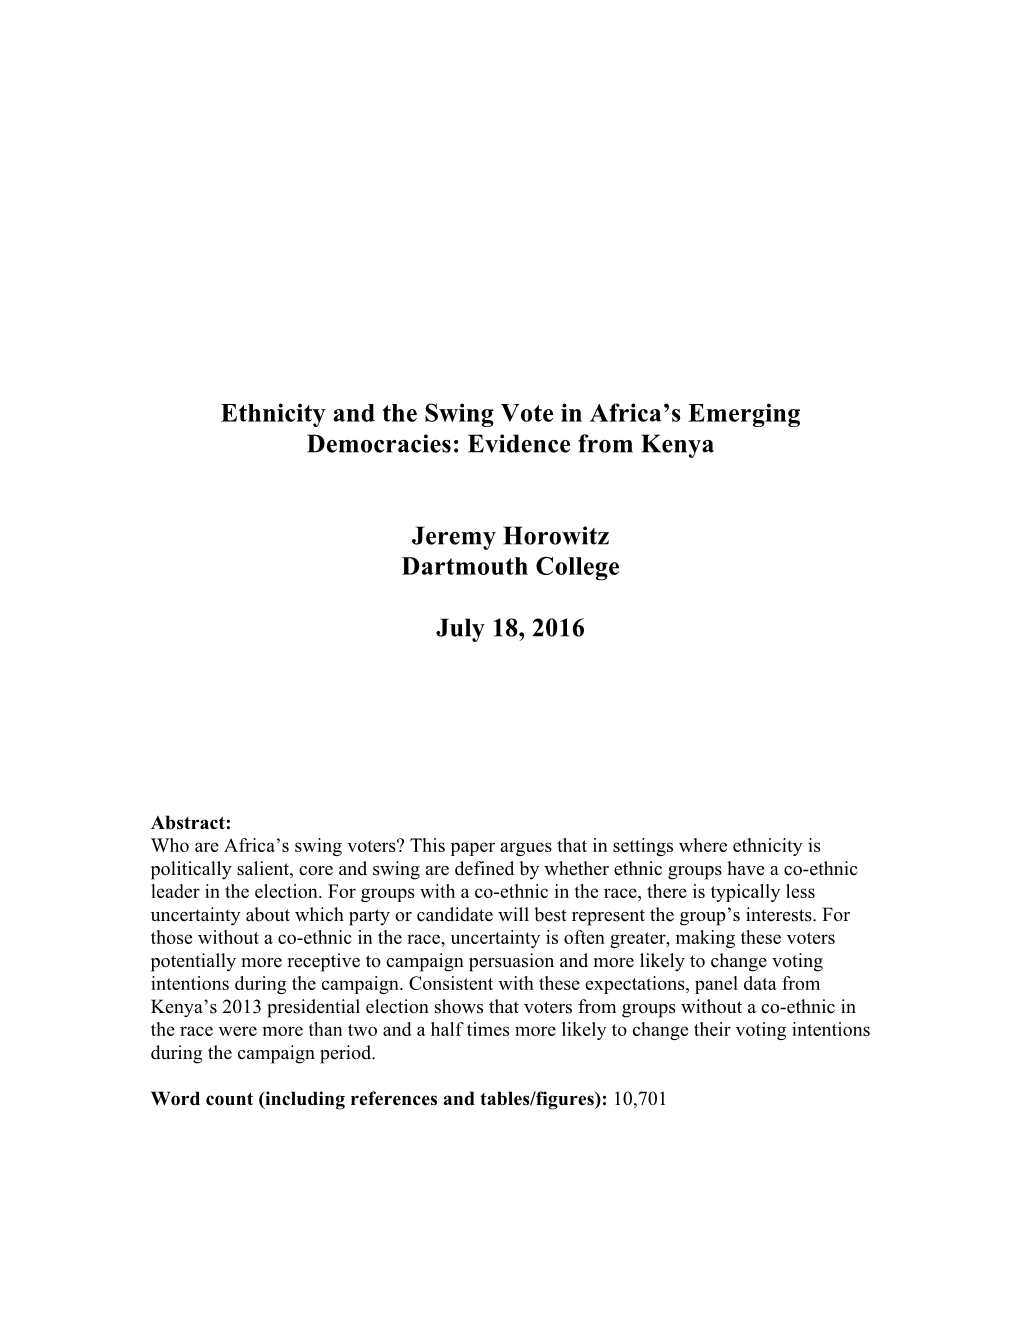 Ethnicity and the Swing Vote in Africa's Emerging Democracies